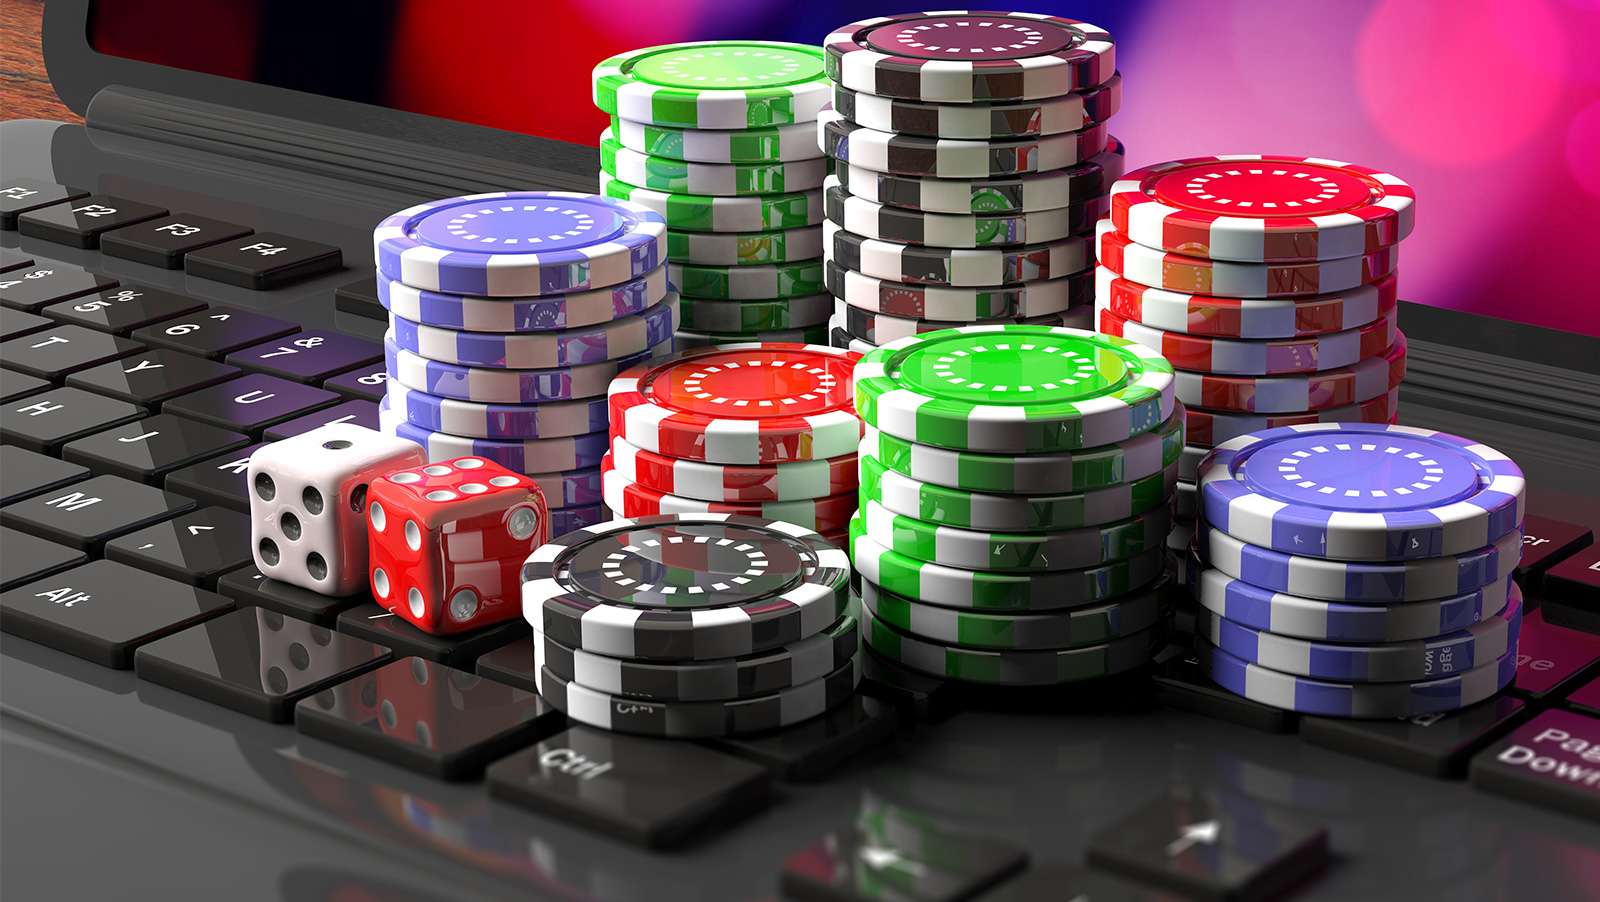 US Industry Group Pushes for Legal Online Gambling